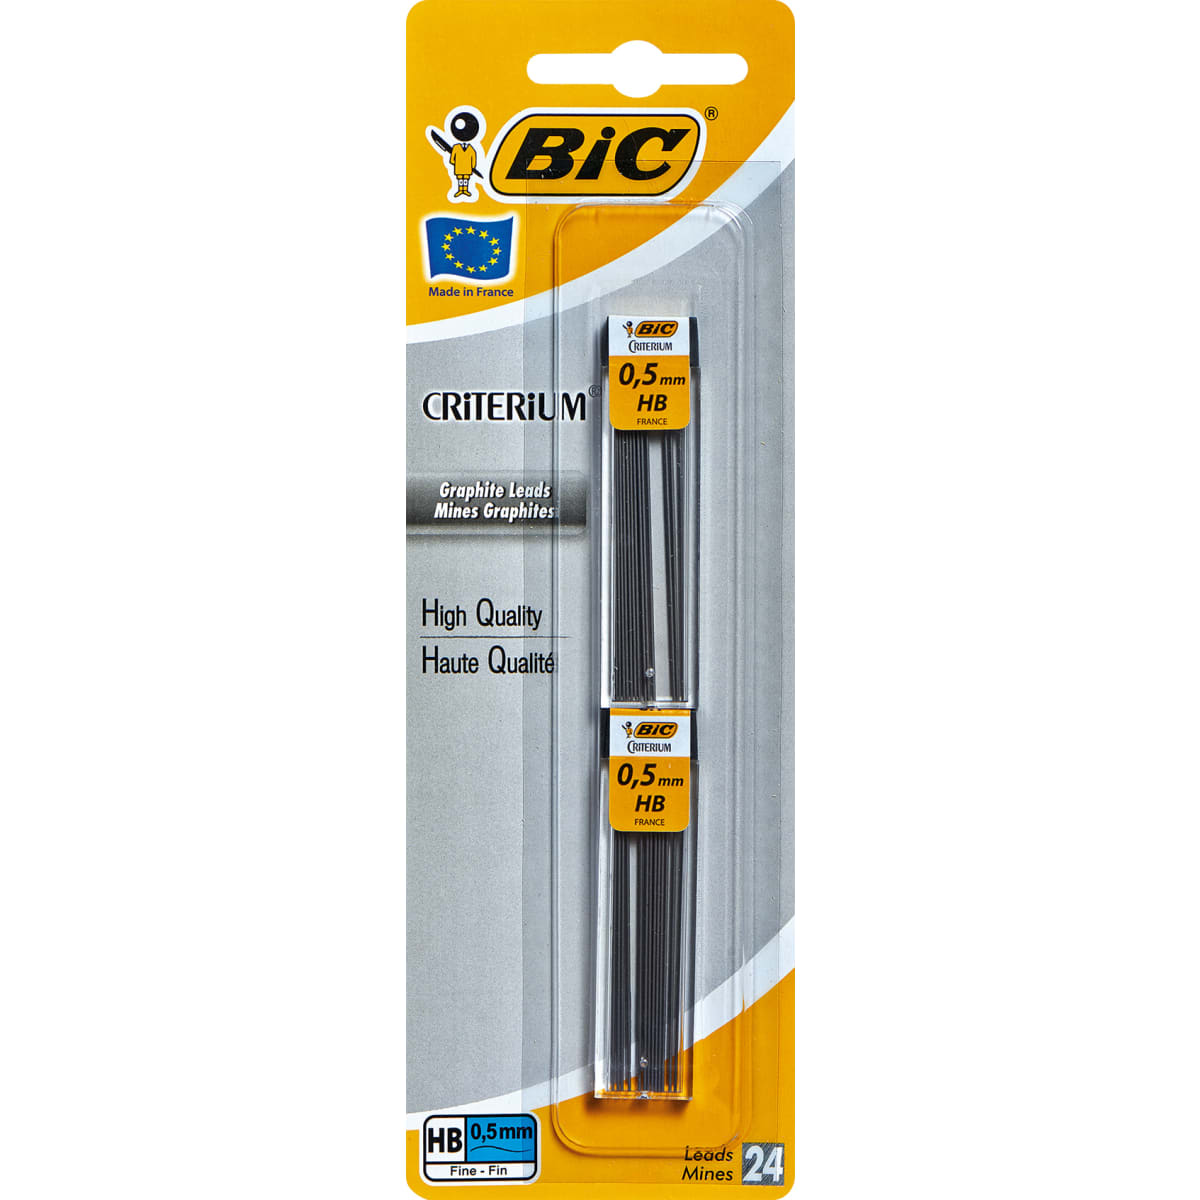 BIC Criterium Leads Refills 0 5mm for Mechanical Pencils Set of 2 RRP 3.90 CLEARANCE XL 2.99